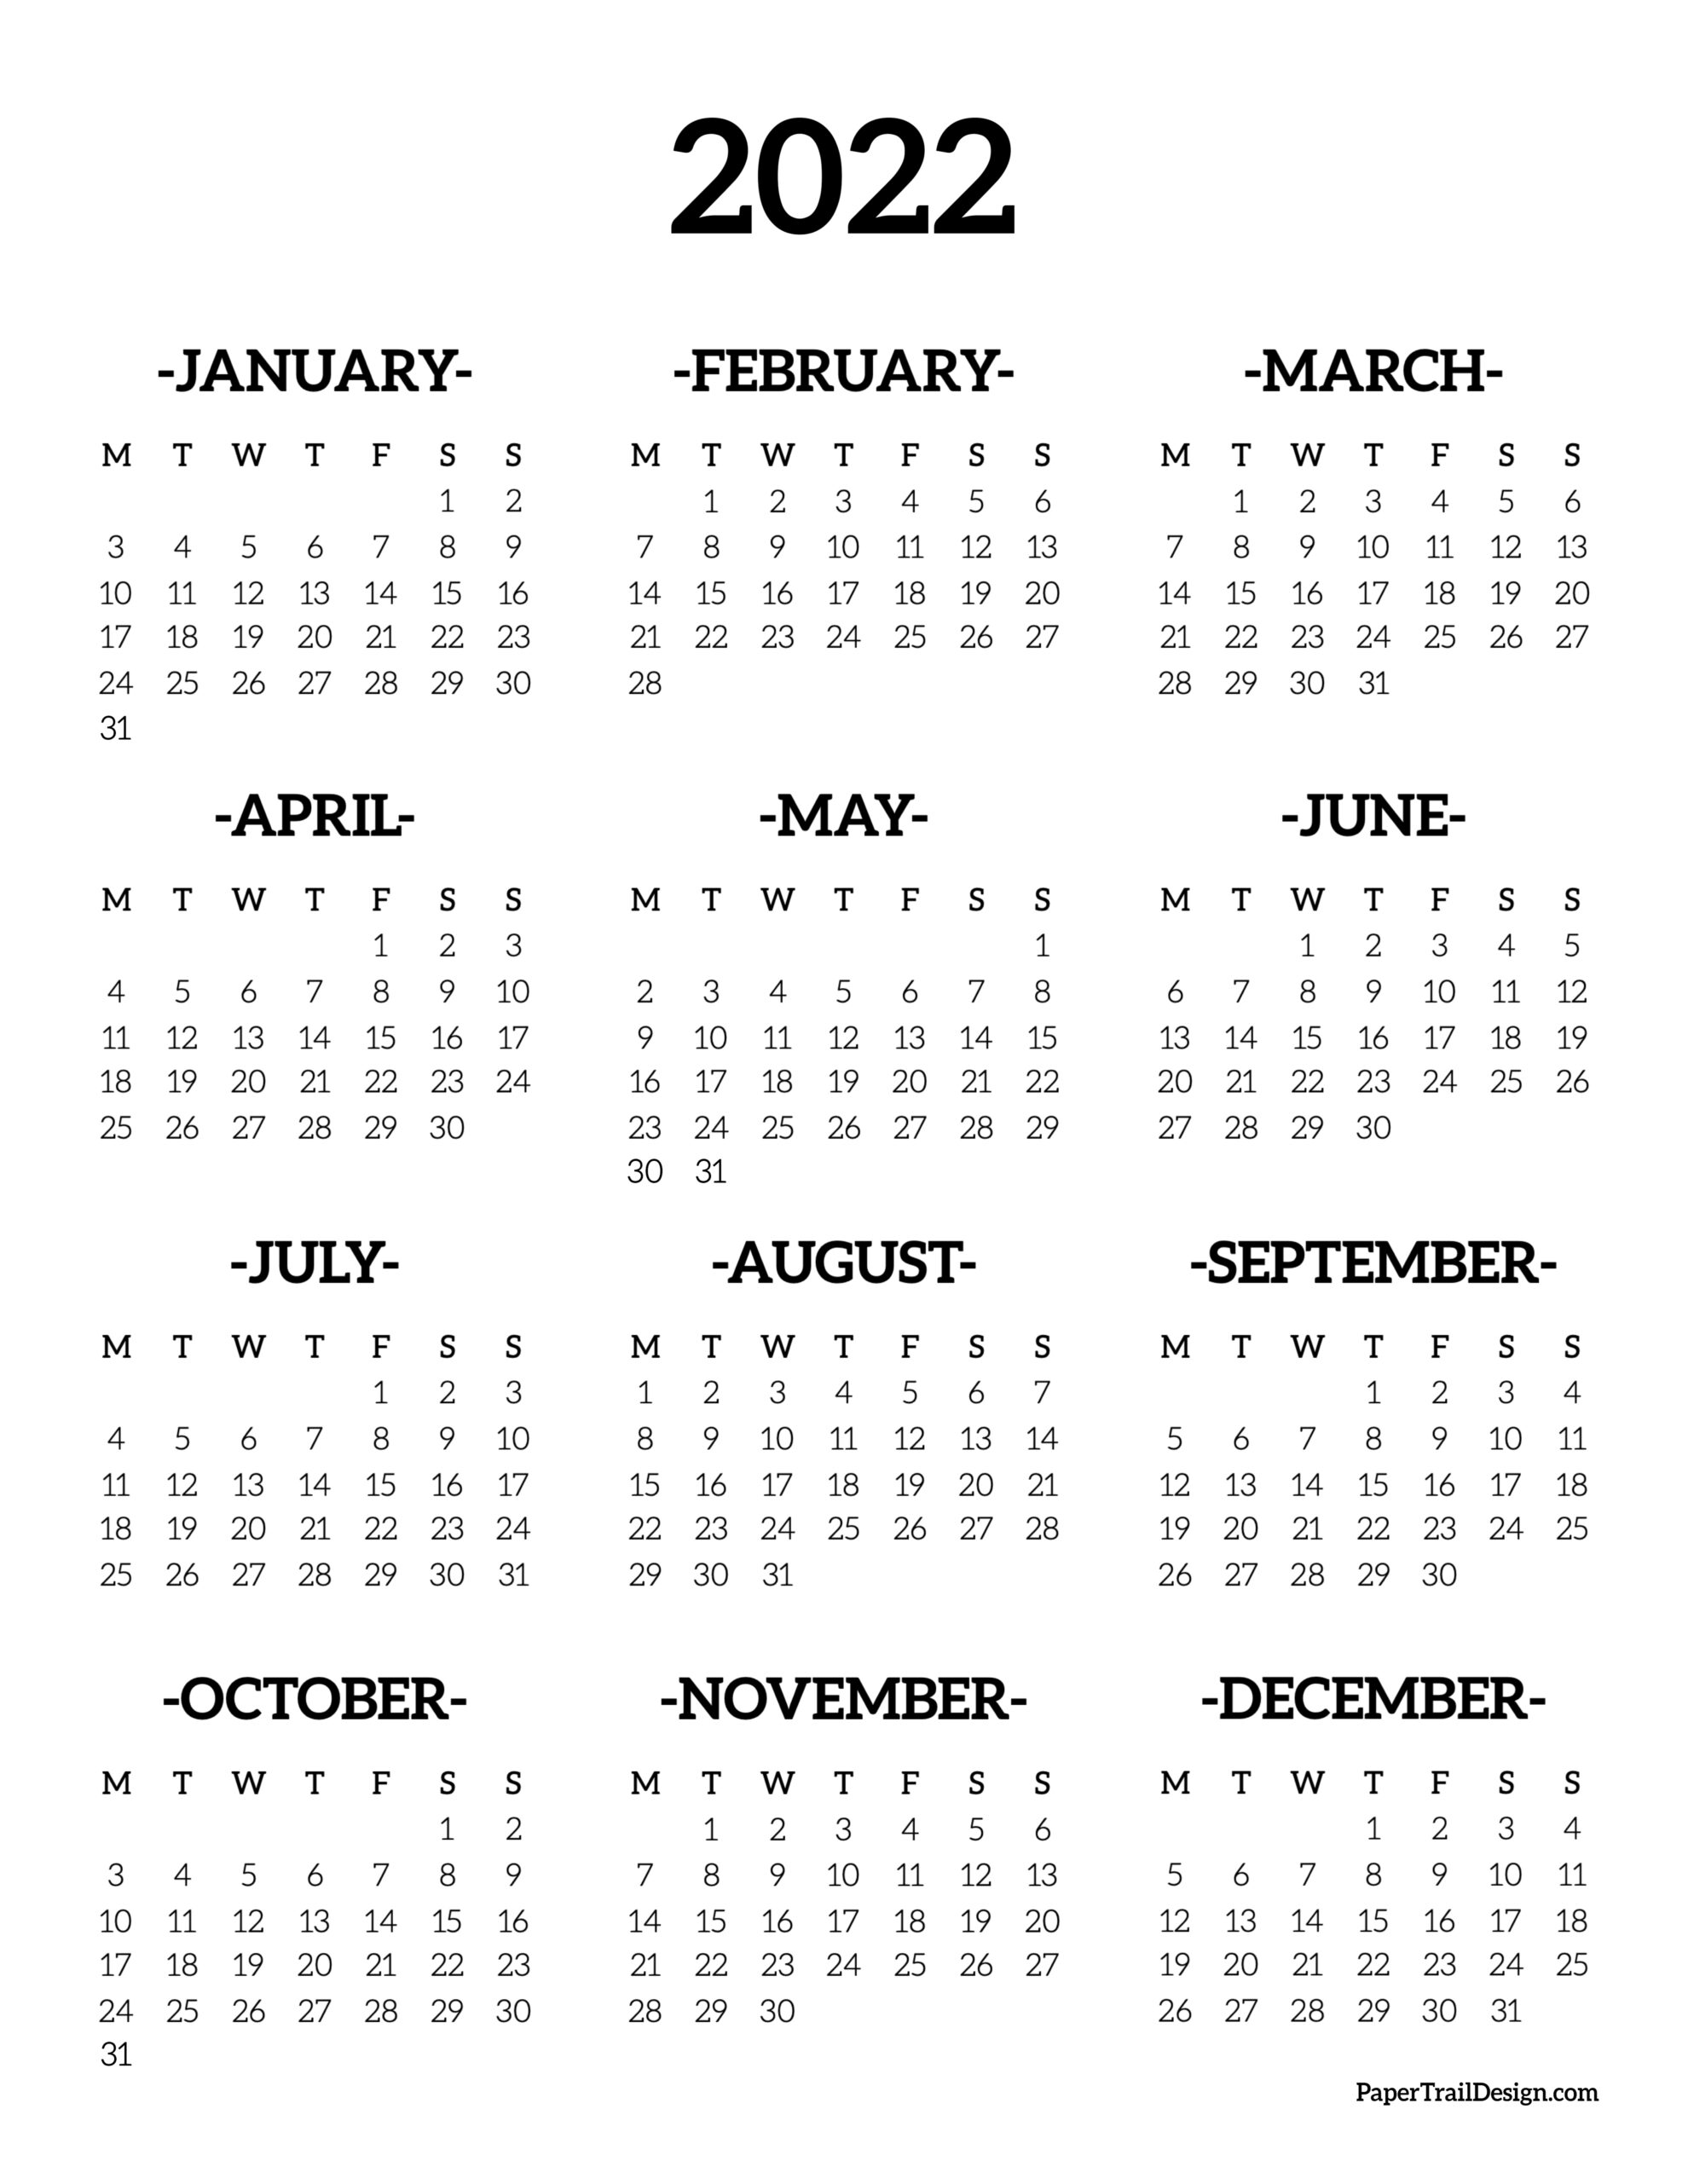 Print 2022 Calendar One Page 2022 Monday Start Calendar- One Page - Paper Trail Design